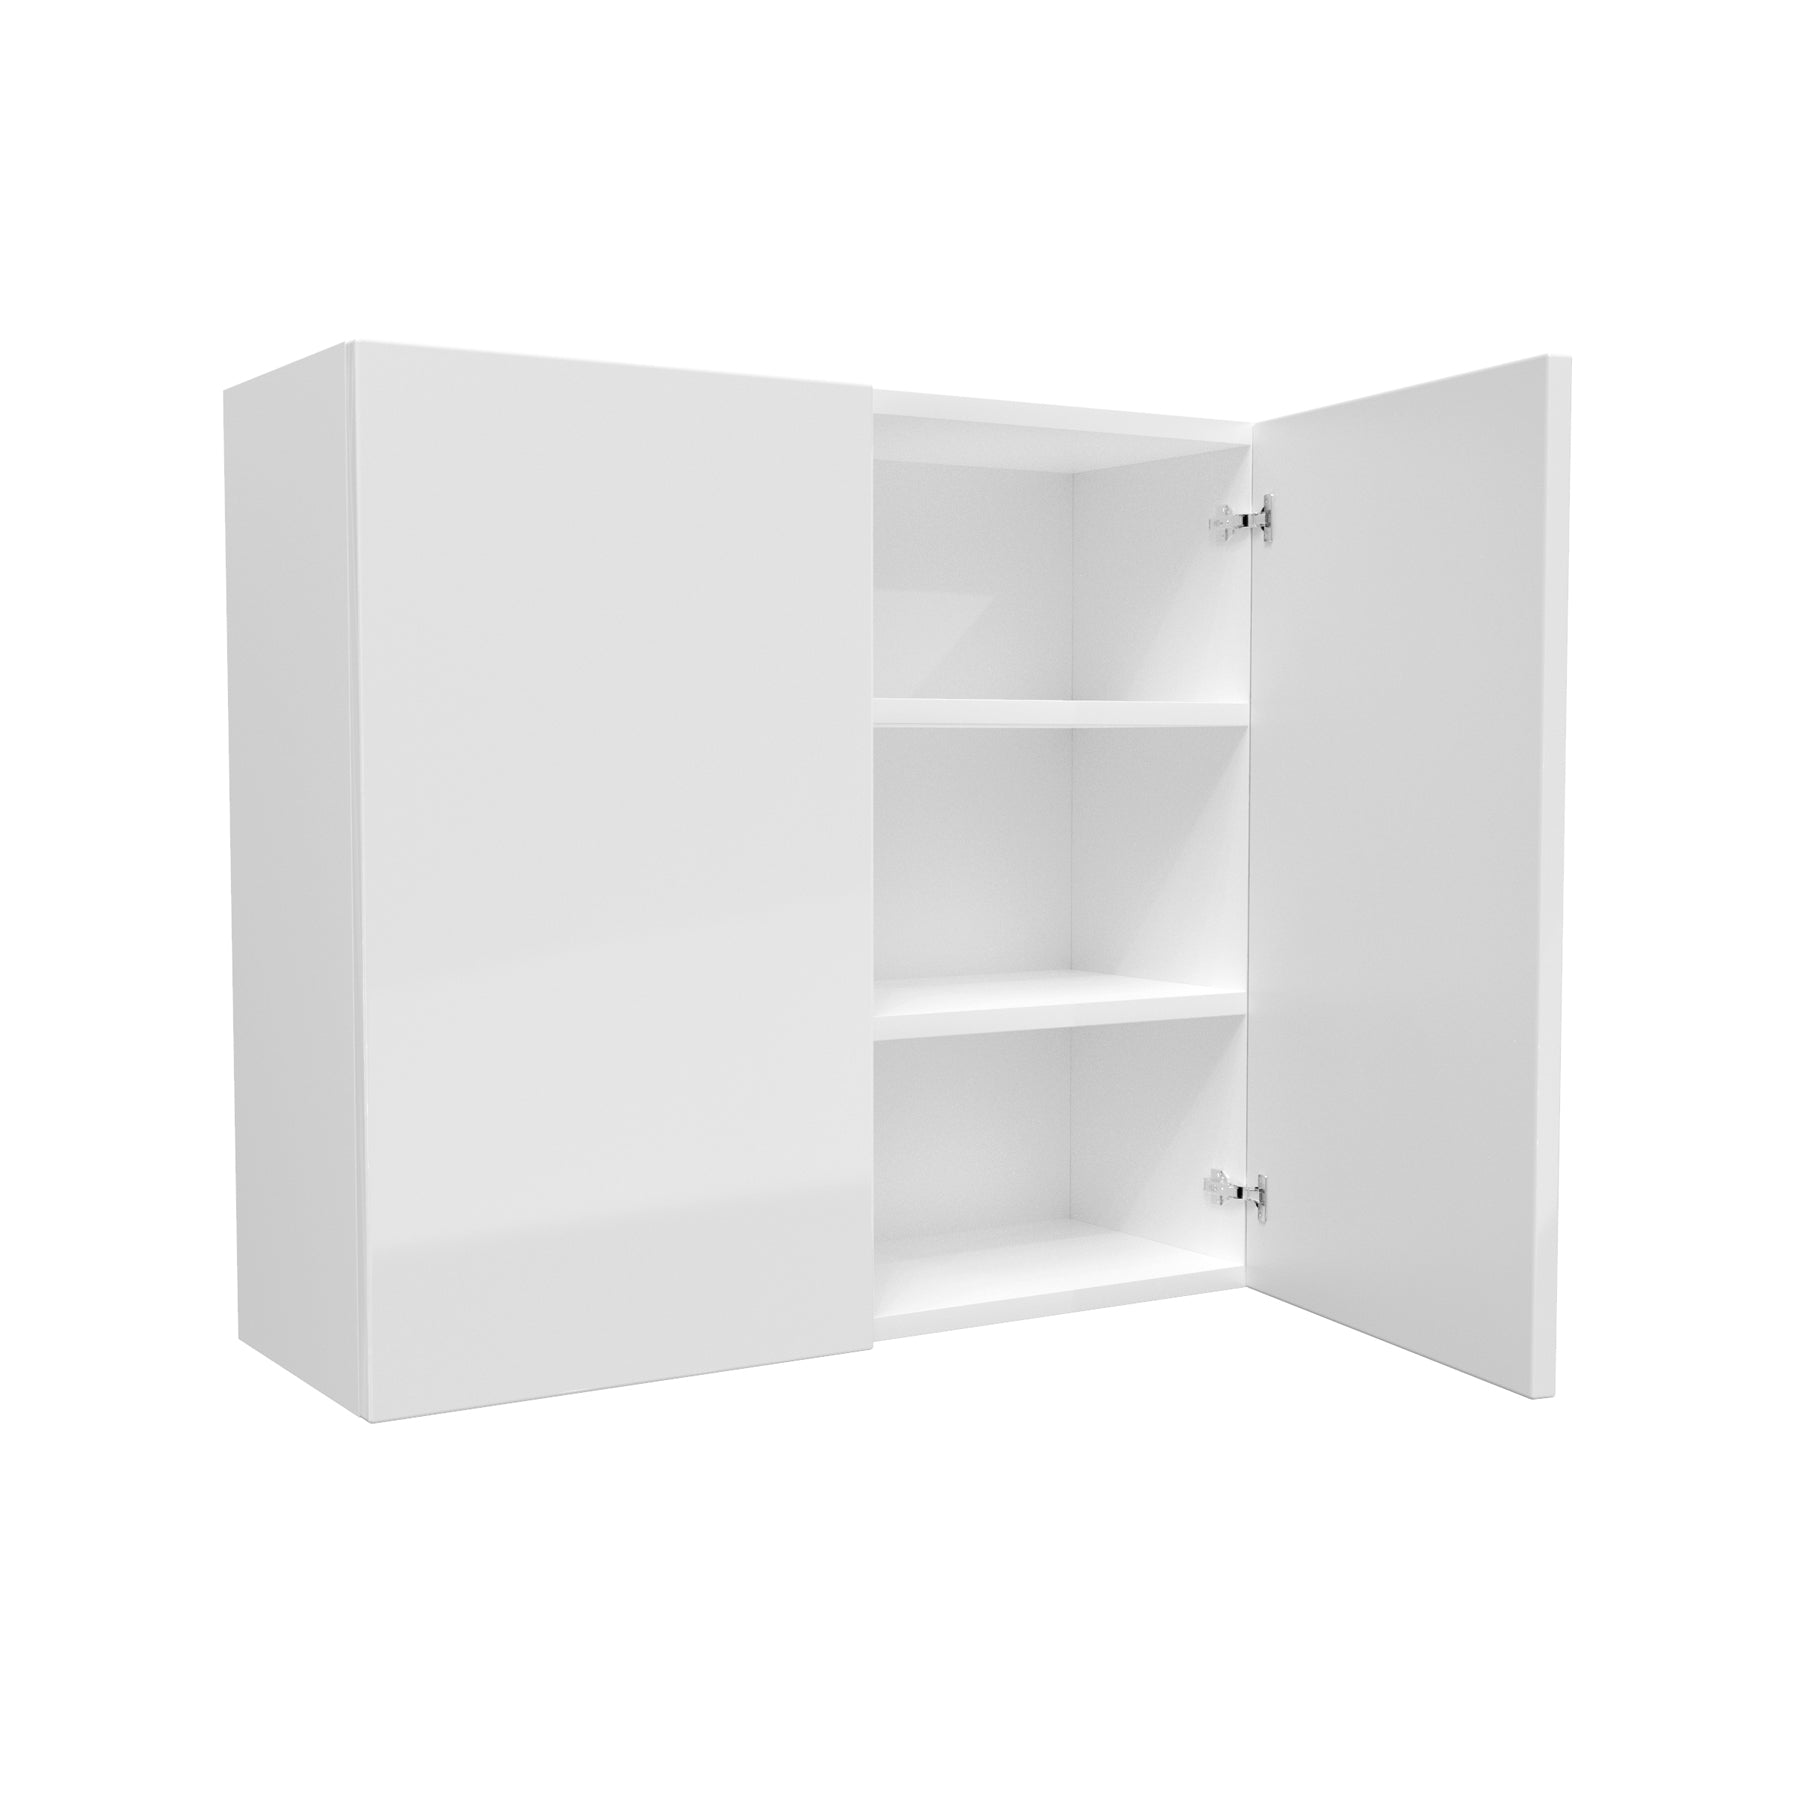 Double Door Wall Cabinet | Milano White | 33W x 30H x 12D